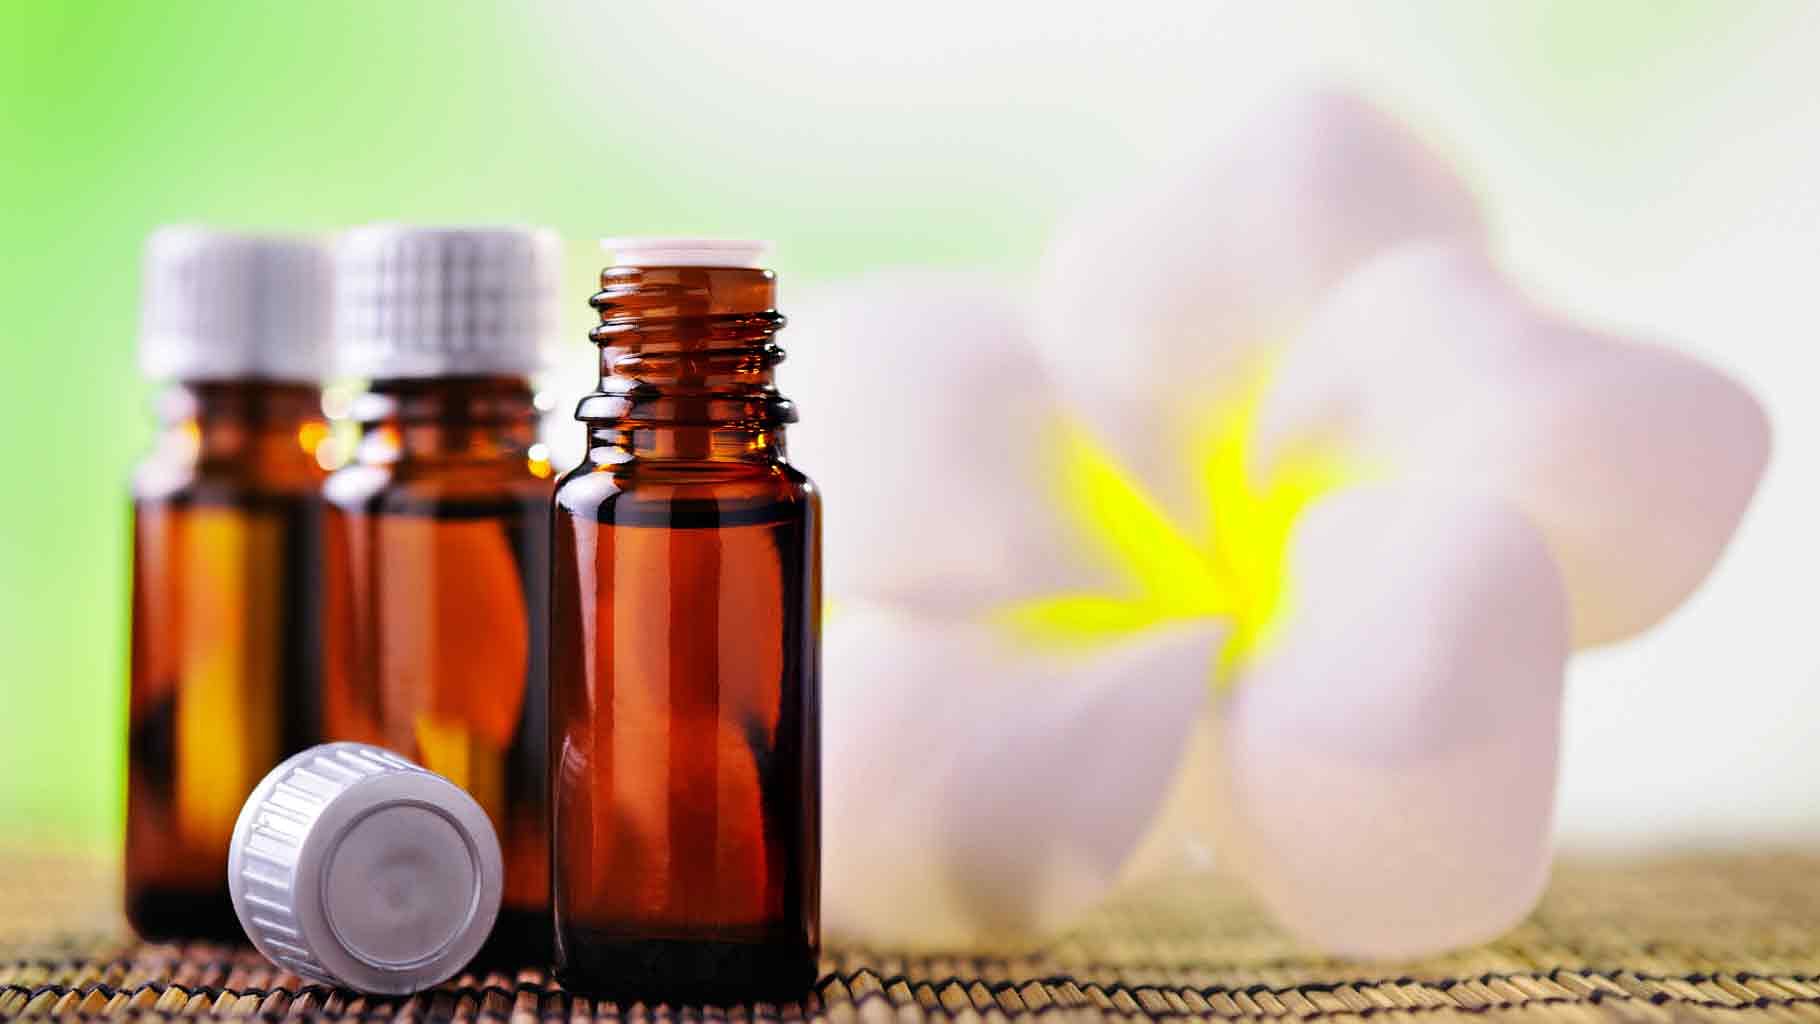 Here are 10 essential oil remedies for kids that you should try.